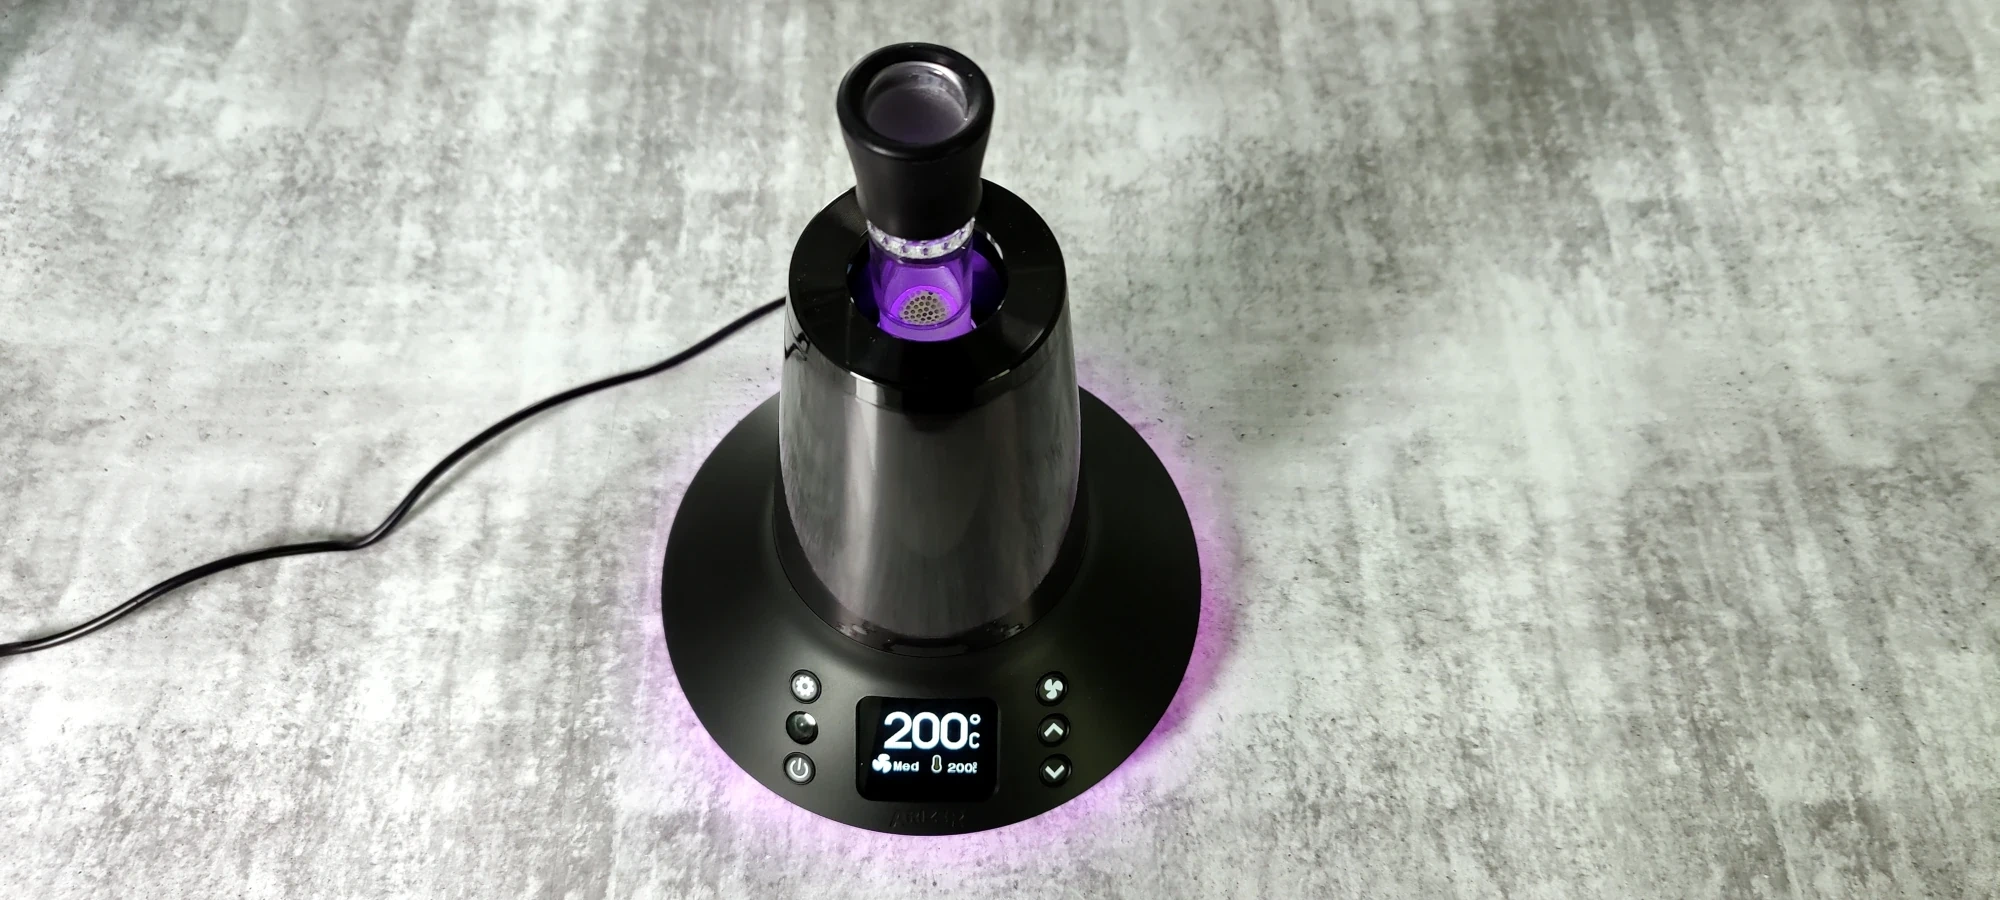 Arizer XQ2 with purple light and heating enabled